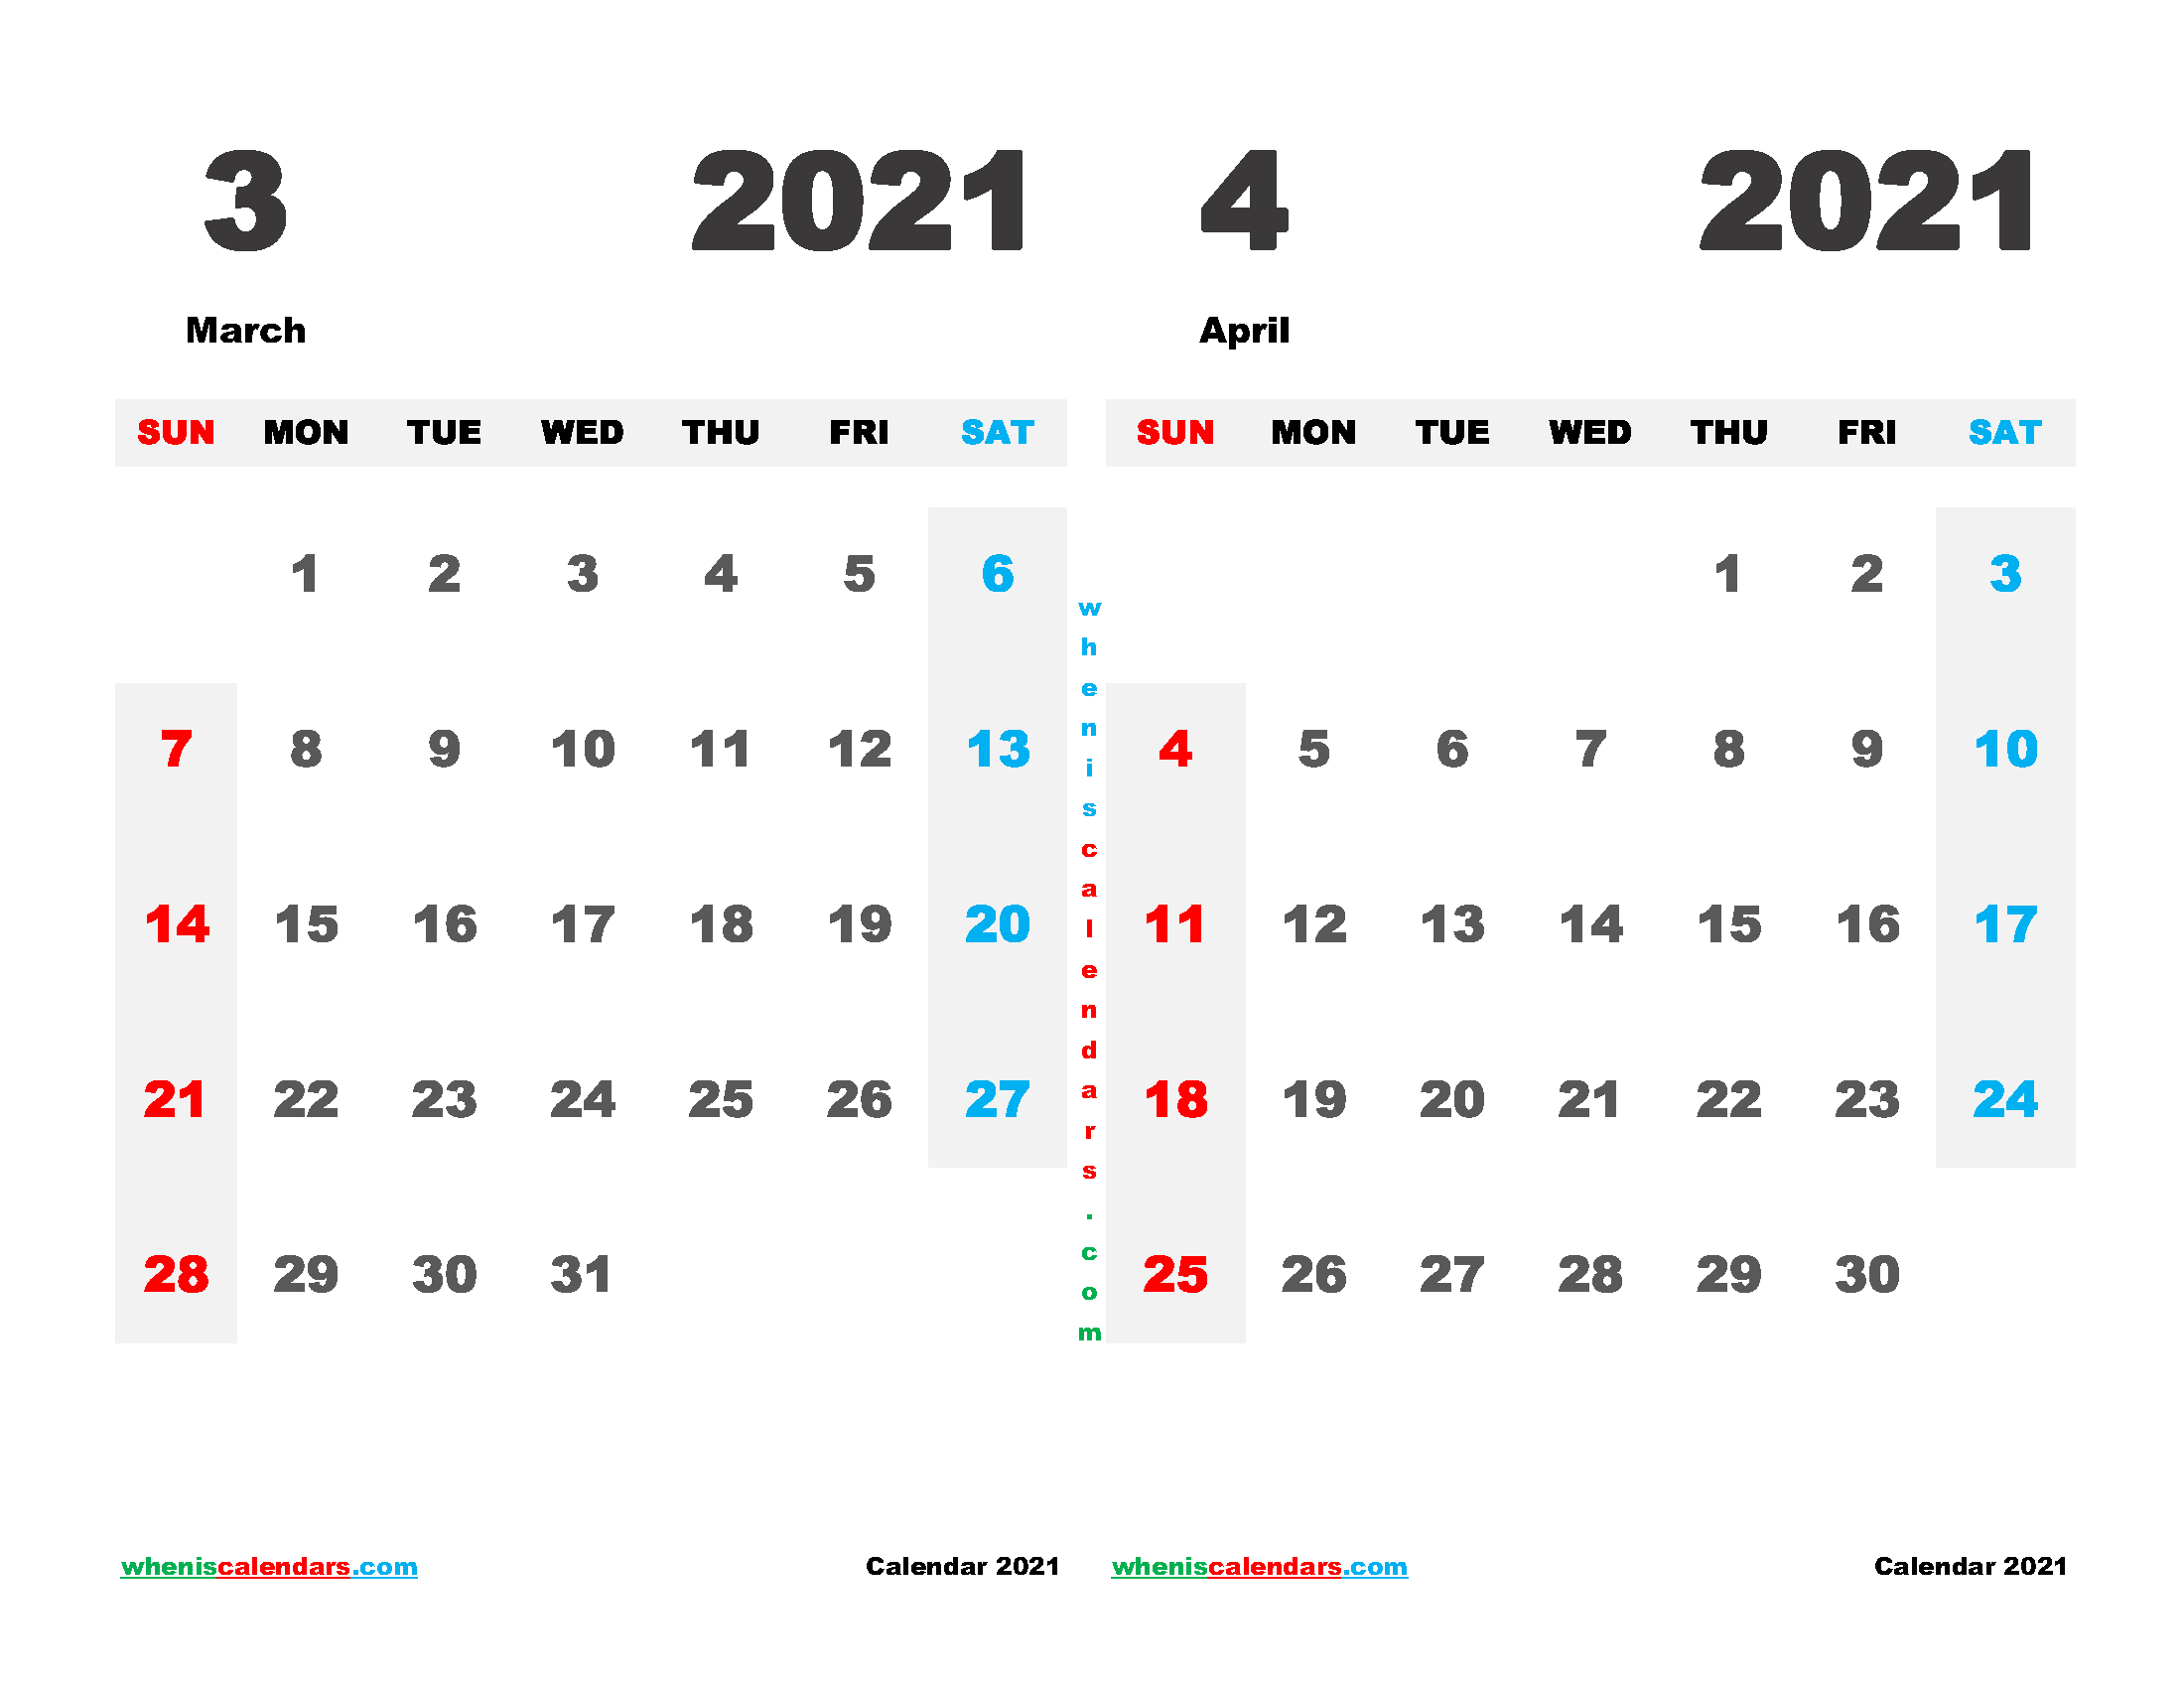 Calendar for March and April 2021